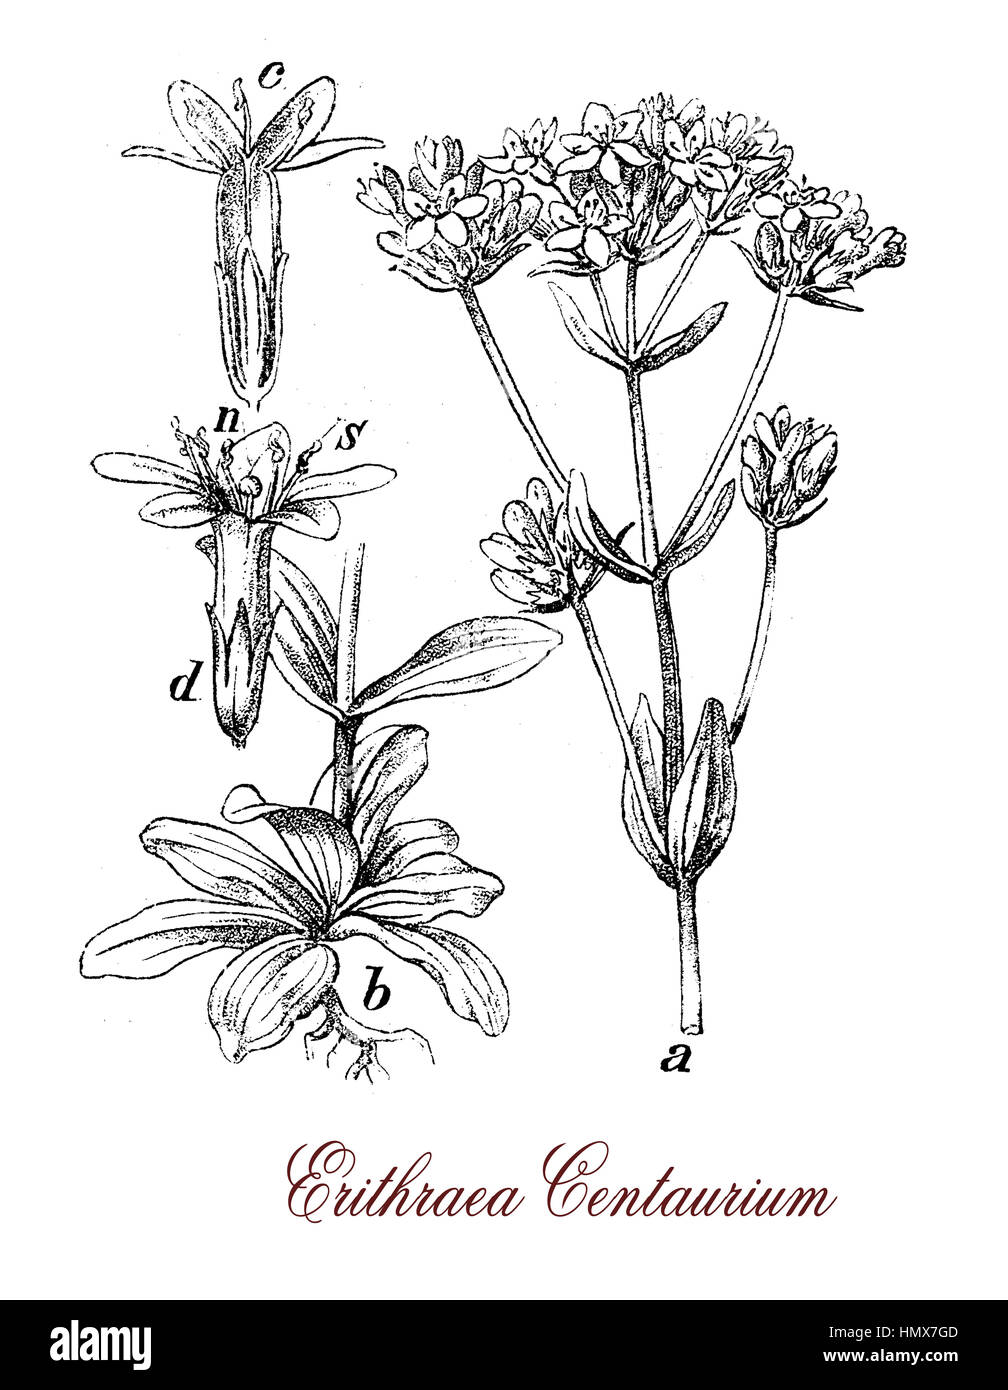 Centaurium erythraea or common centaury is a medical herb, the tea is used for gastric and liver diseases Stock Photo